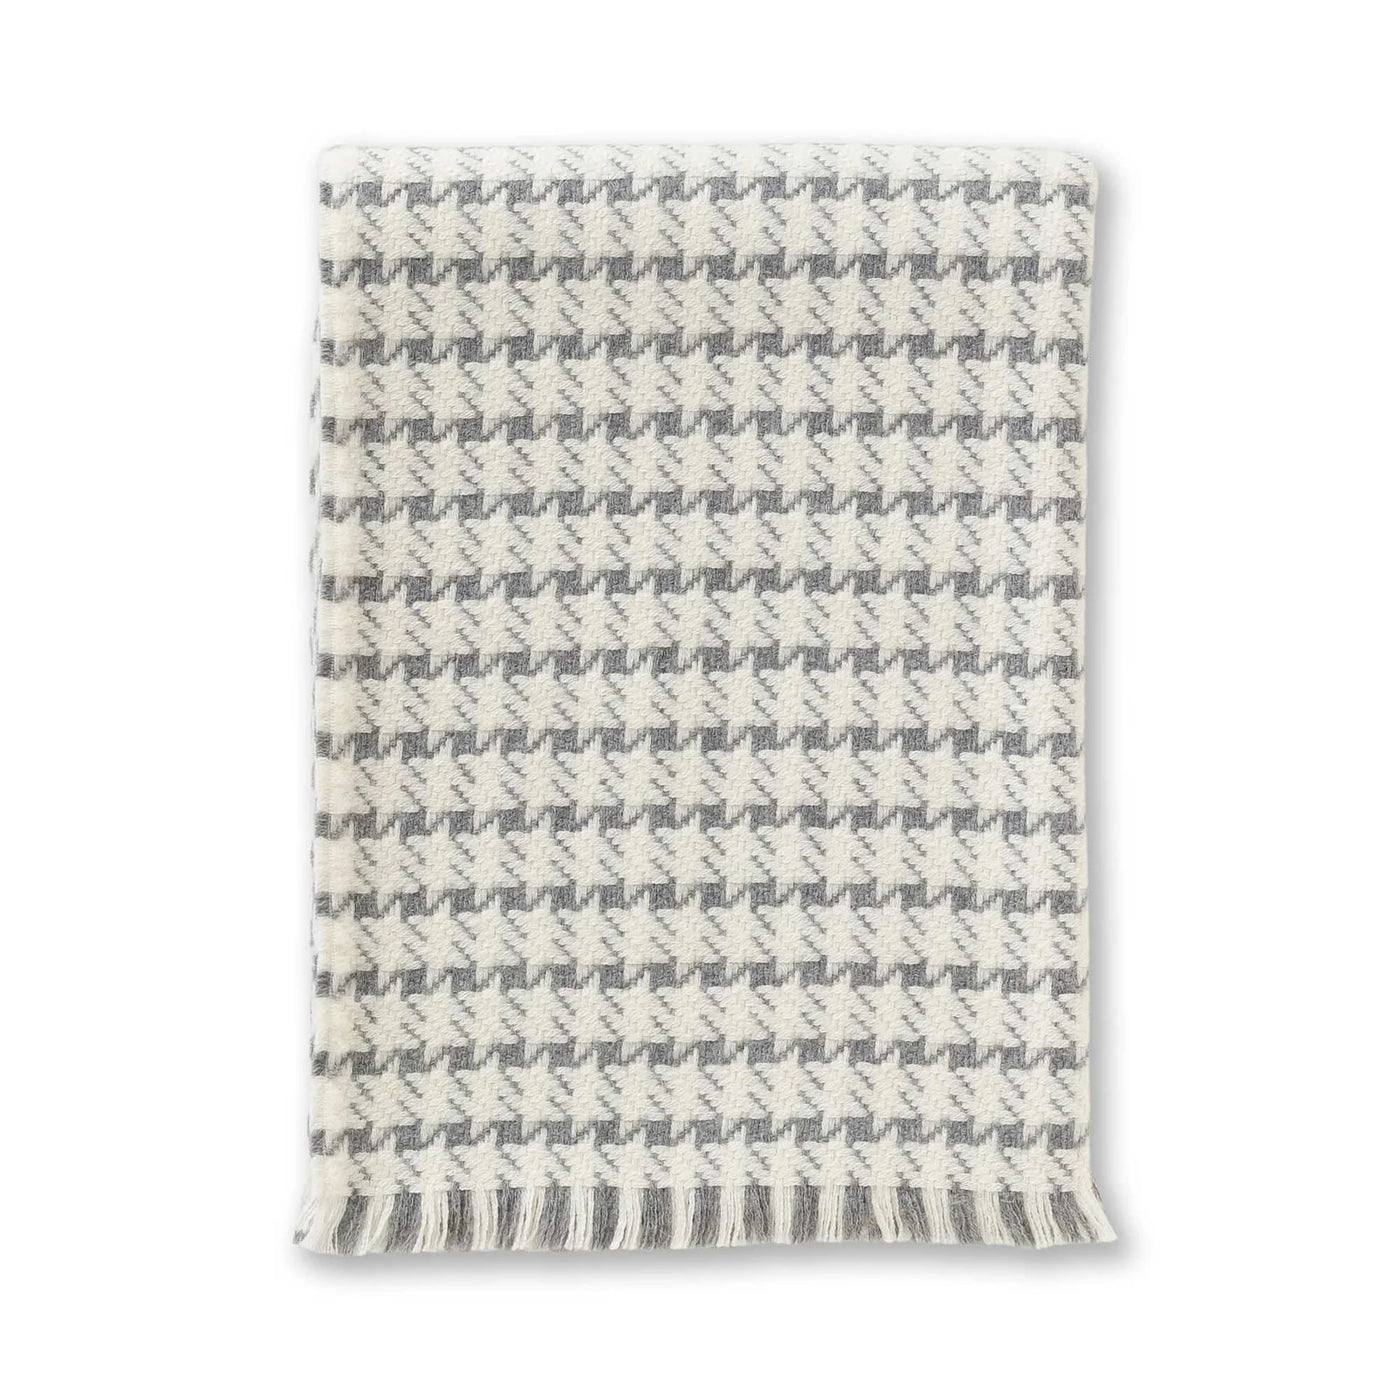 ALICIA ADAMS THROW KINGSTON (Available in Colors)